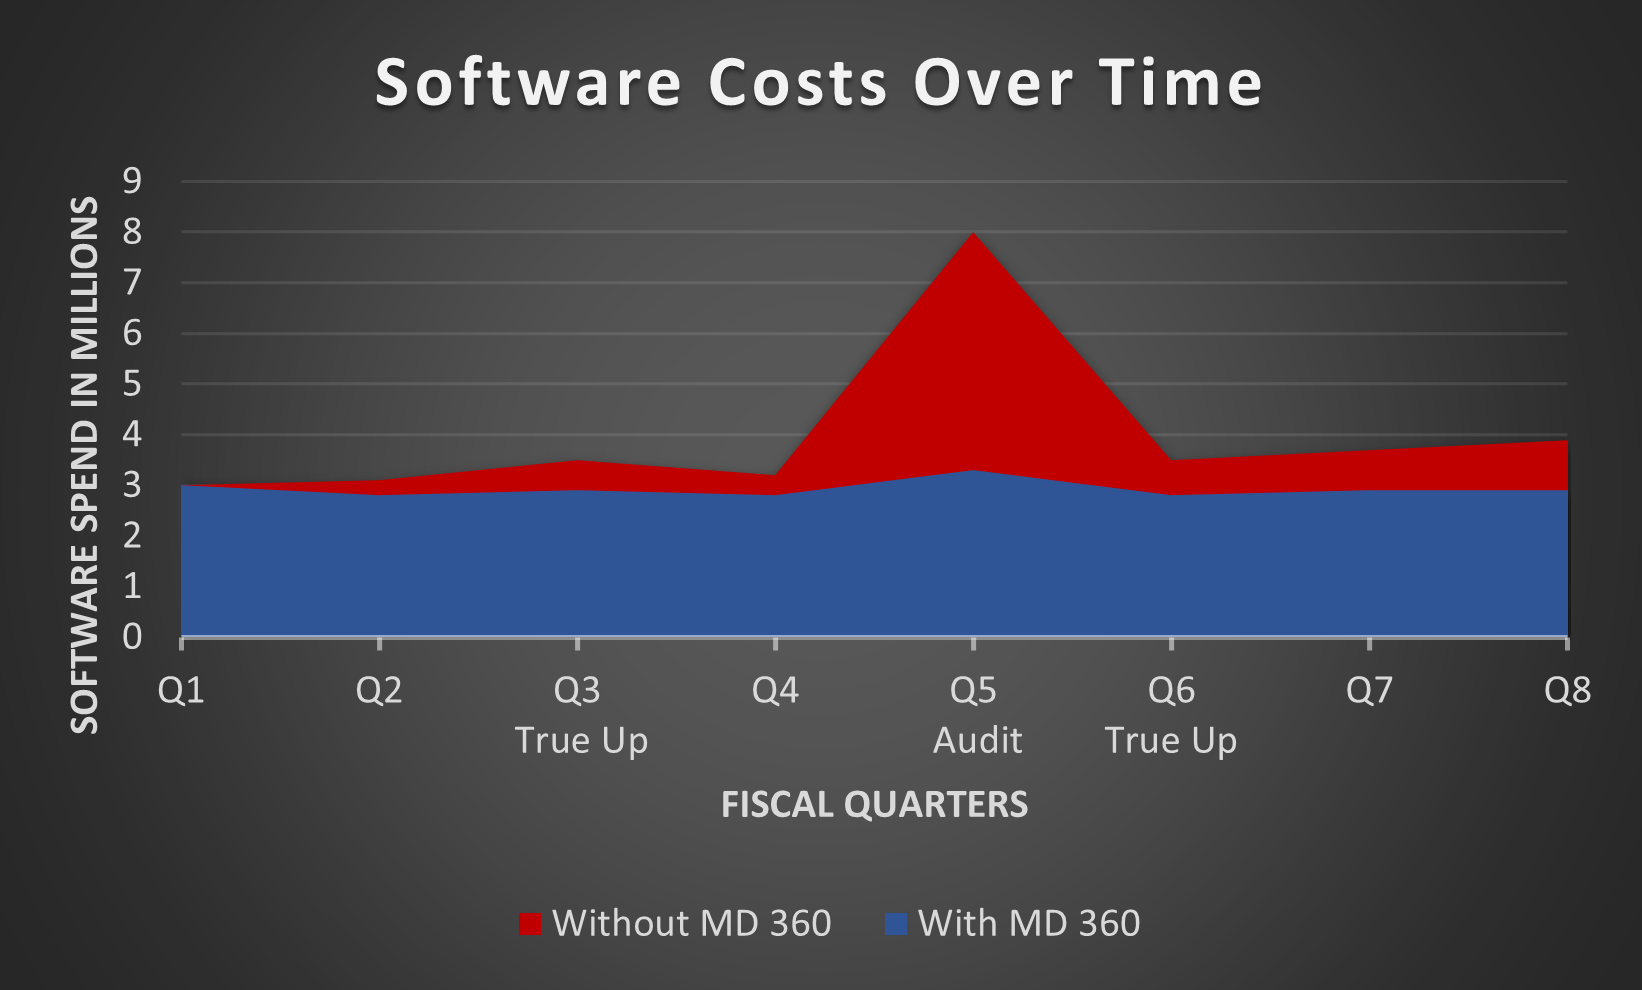 SAM Compass Software Spend Chart with Assets Managed